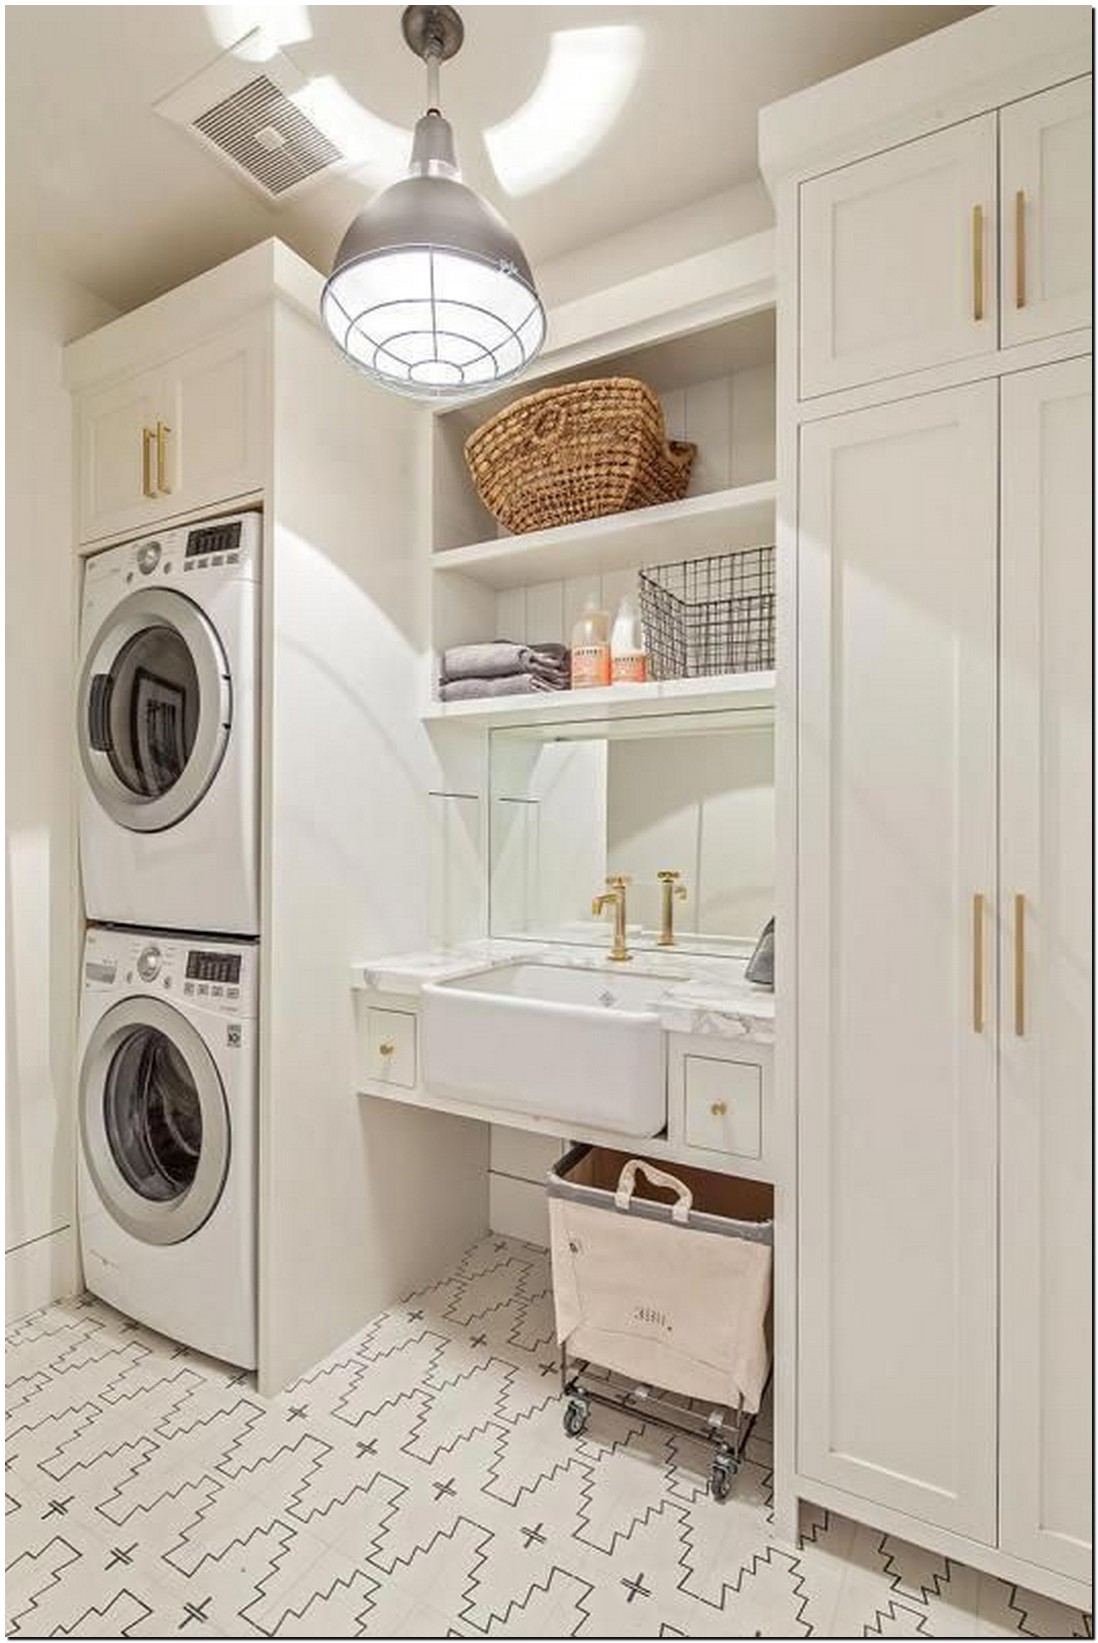 40+ extraordinary design and decoration ideas for small laundry rooms 44